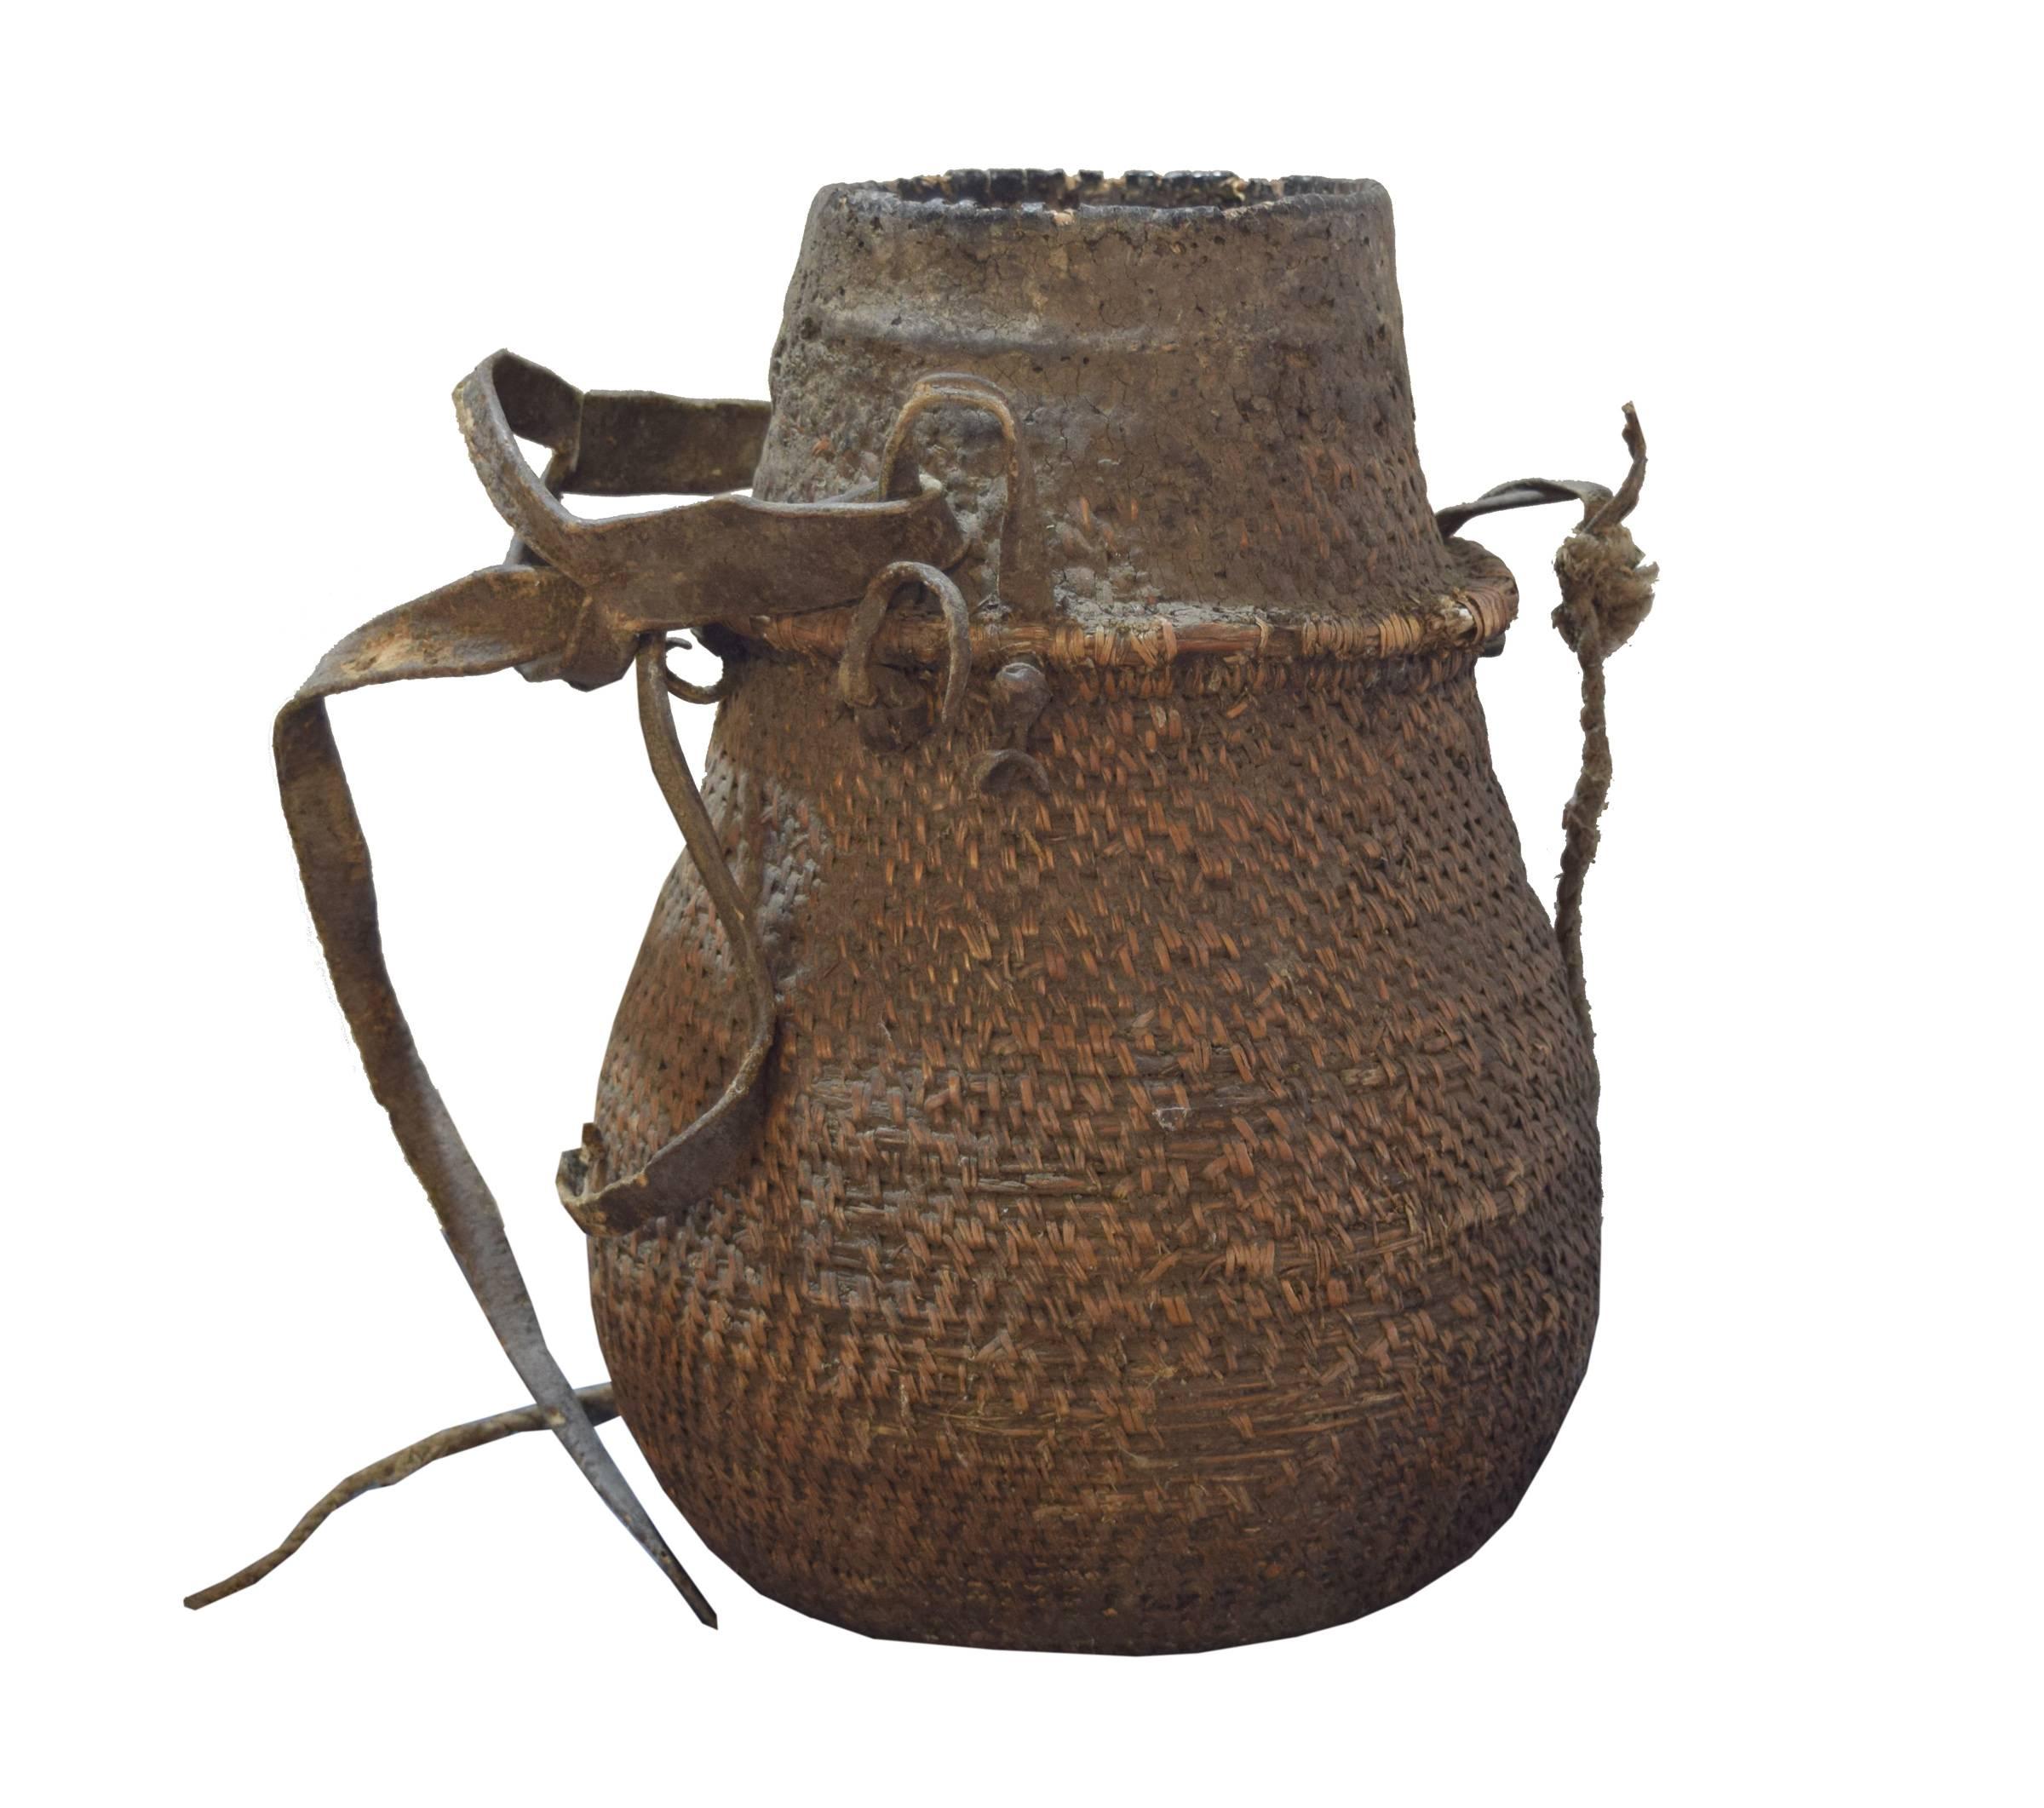 Ethiopian milk vessel with a well-worn patina, made of tightly wound fibers, leather and rope. These baskets were woven by women using fiber from the roots of various vegetable species available in the area. Used everyday to carry and preserve milk,